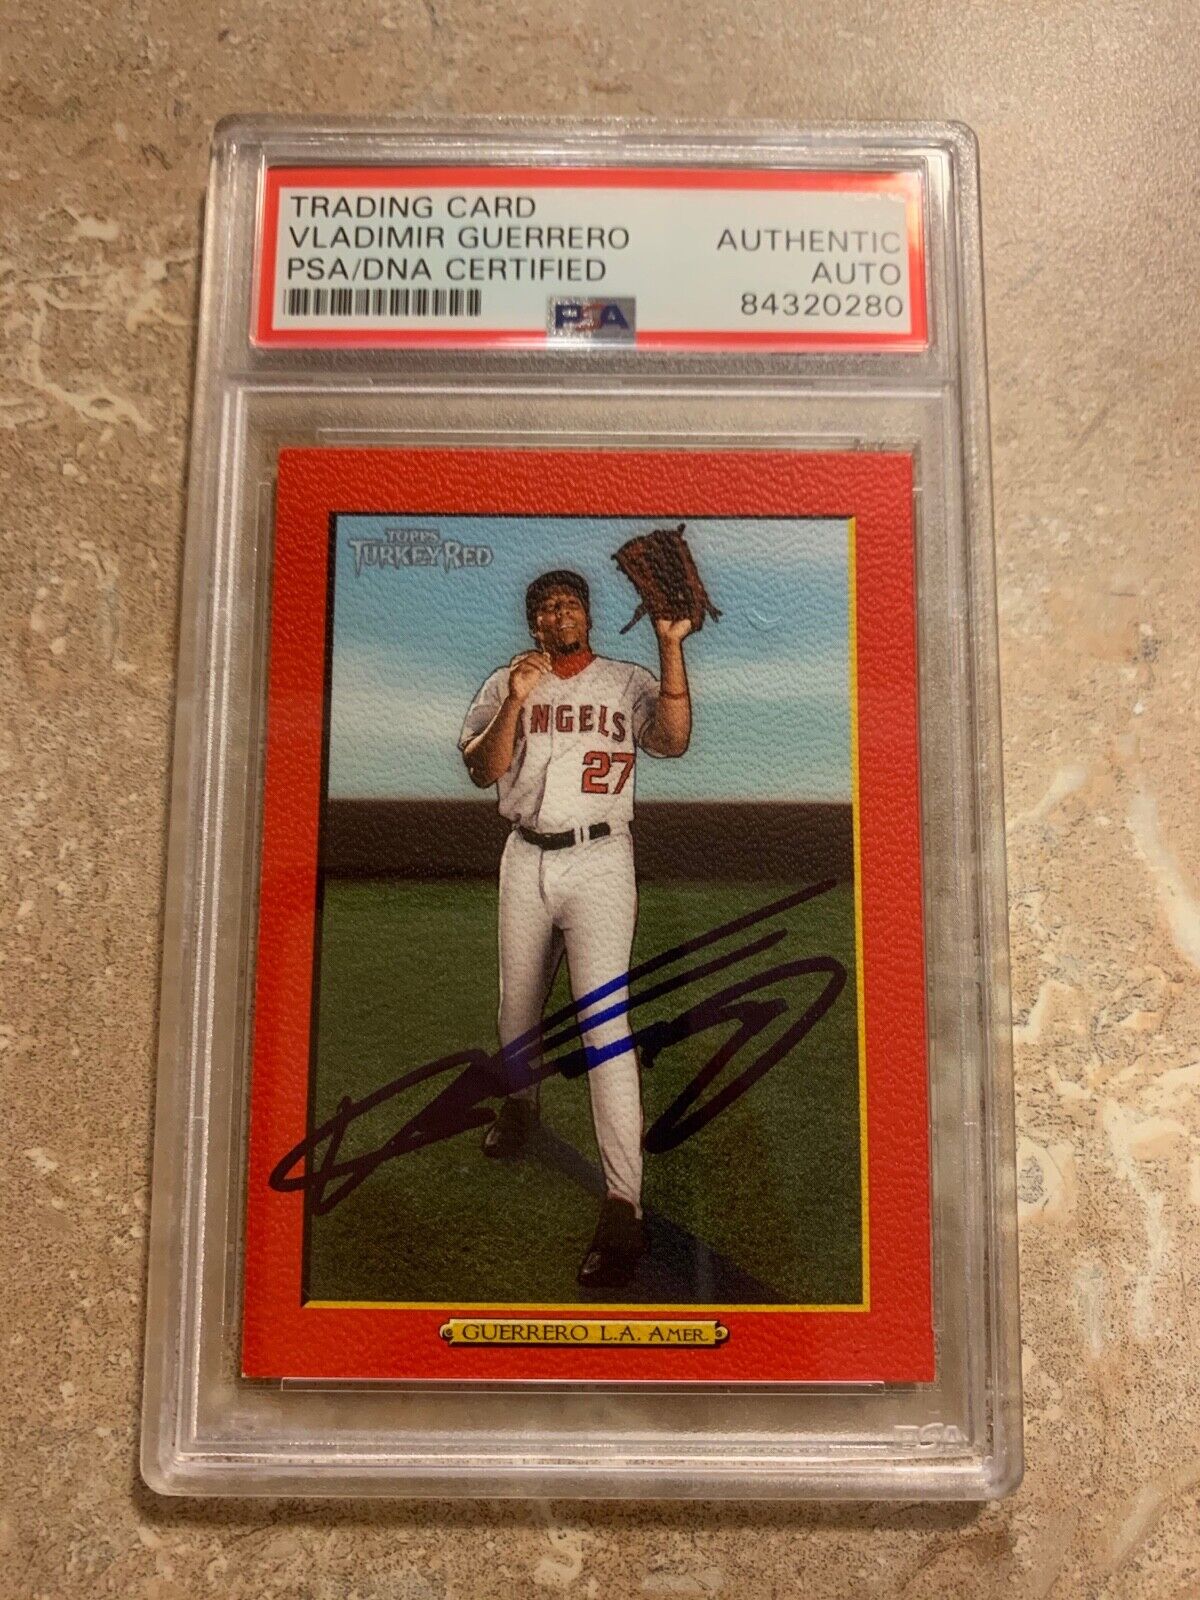 Vladimir Guerrero Autographed 2006 Topps Turkey Red Card PSA Slabbed  RED